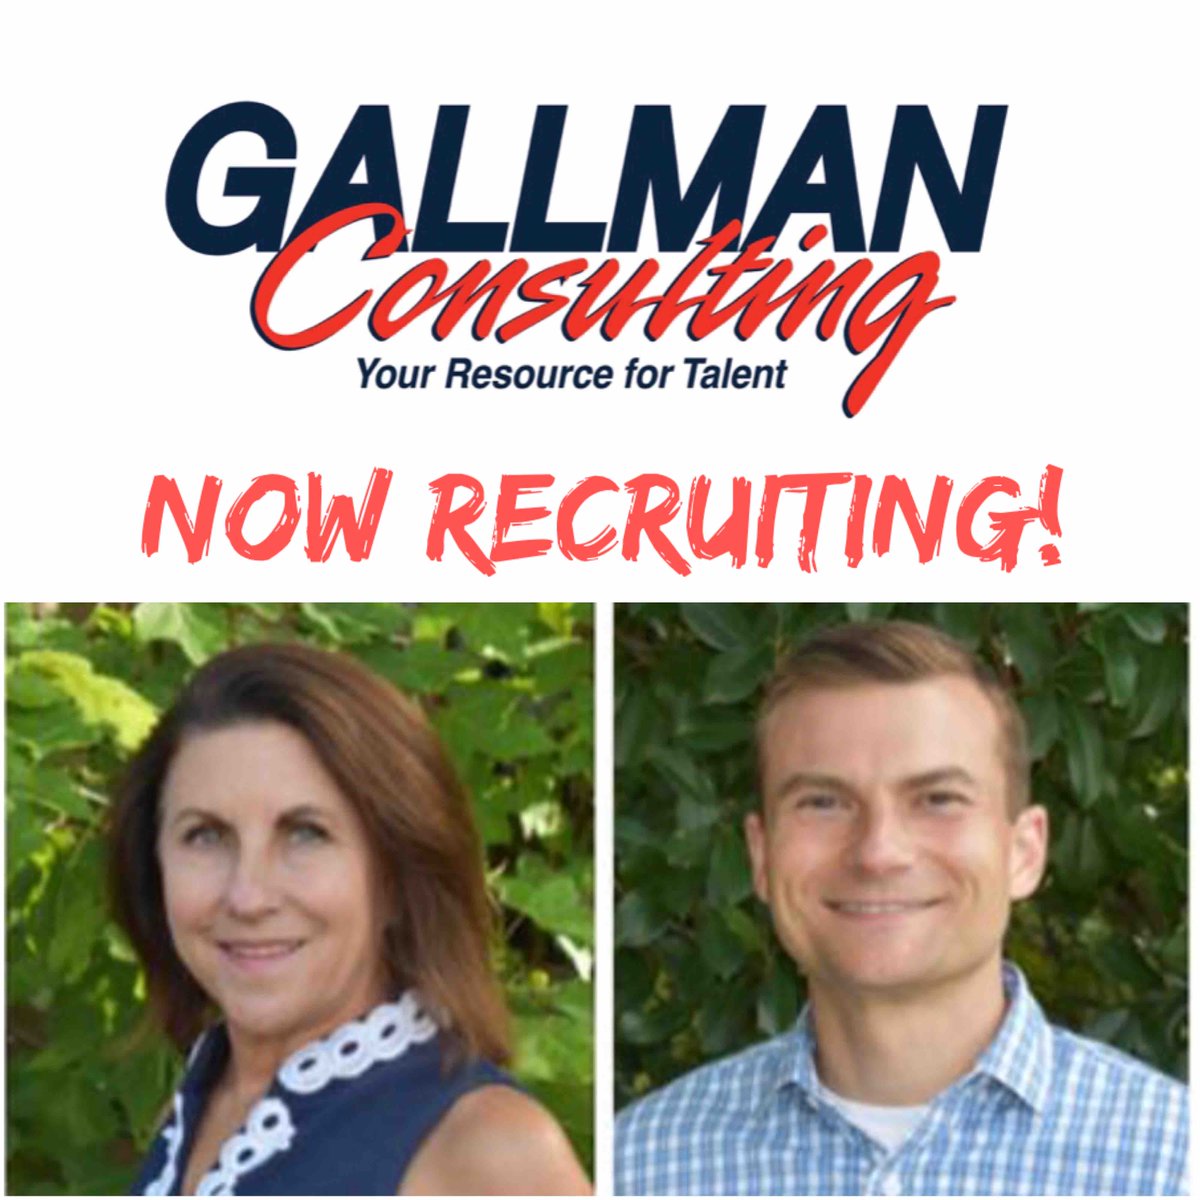 Gallman Consulting is #nowrecruiting 👇
👉Project Manager
👉Lead Retail Project Superintendent
👉Heavy Equipment Field Mechanic
👉HVAC Tech
👉Commercial Superintendents
👉Senior Superintendent Health Care
👉And MORE!
gallman-consulting.com/jobs/#!/search…  #gallmantalent #hiring